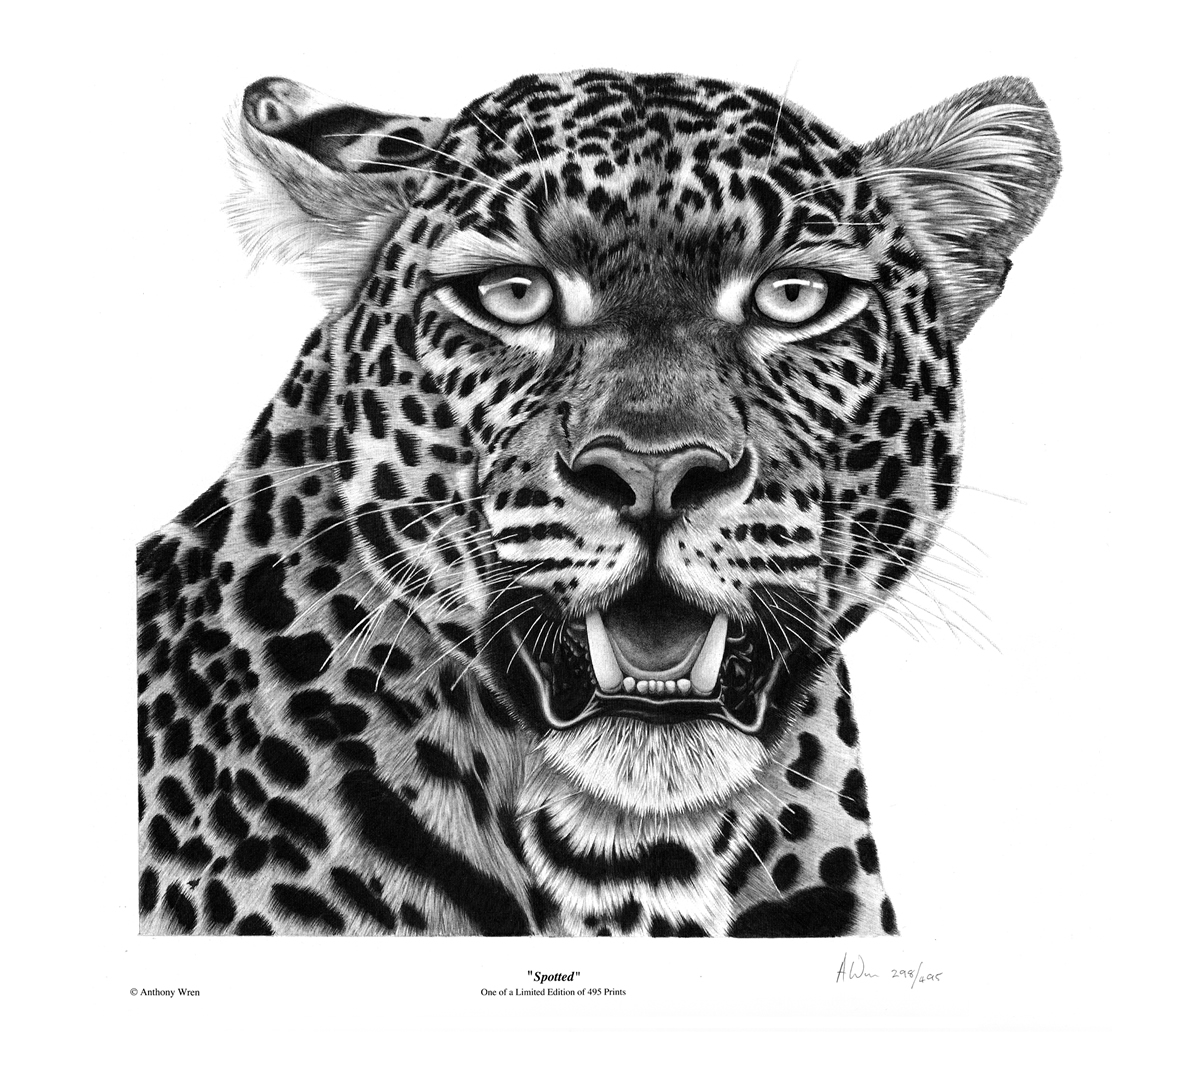 Spotted (Leopard)